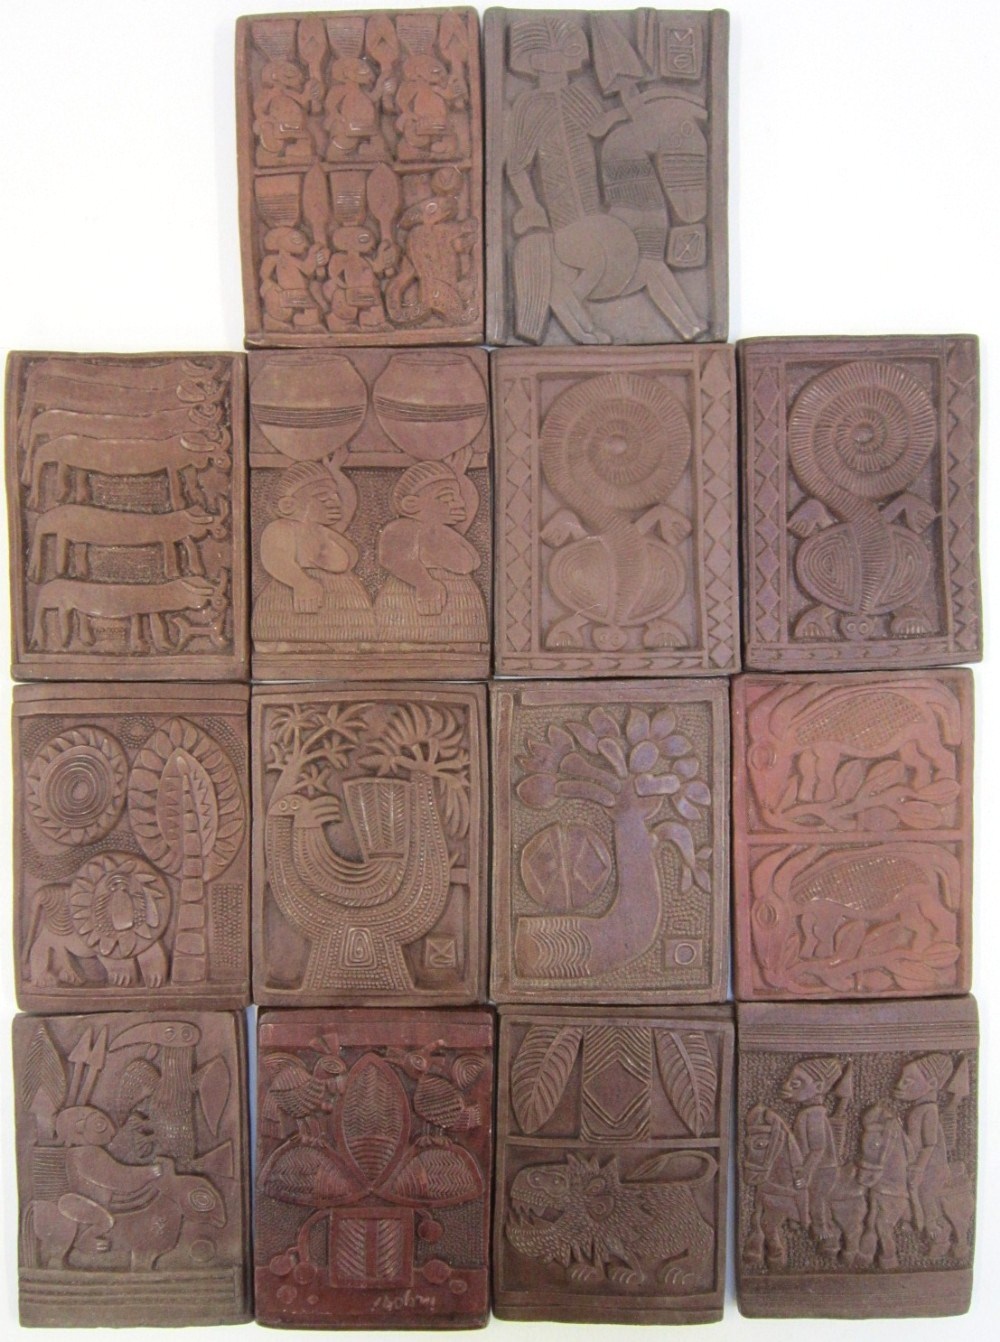 Set of African Ceramic Story Tiles - possibly Lagos School of Art, circa 1970`s. Each 9.5 x 7 cms